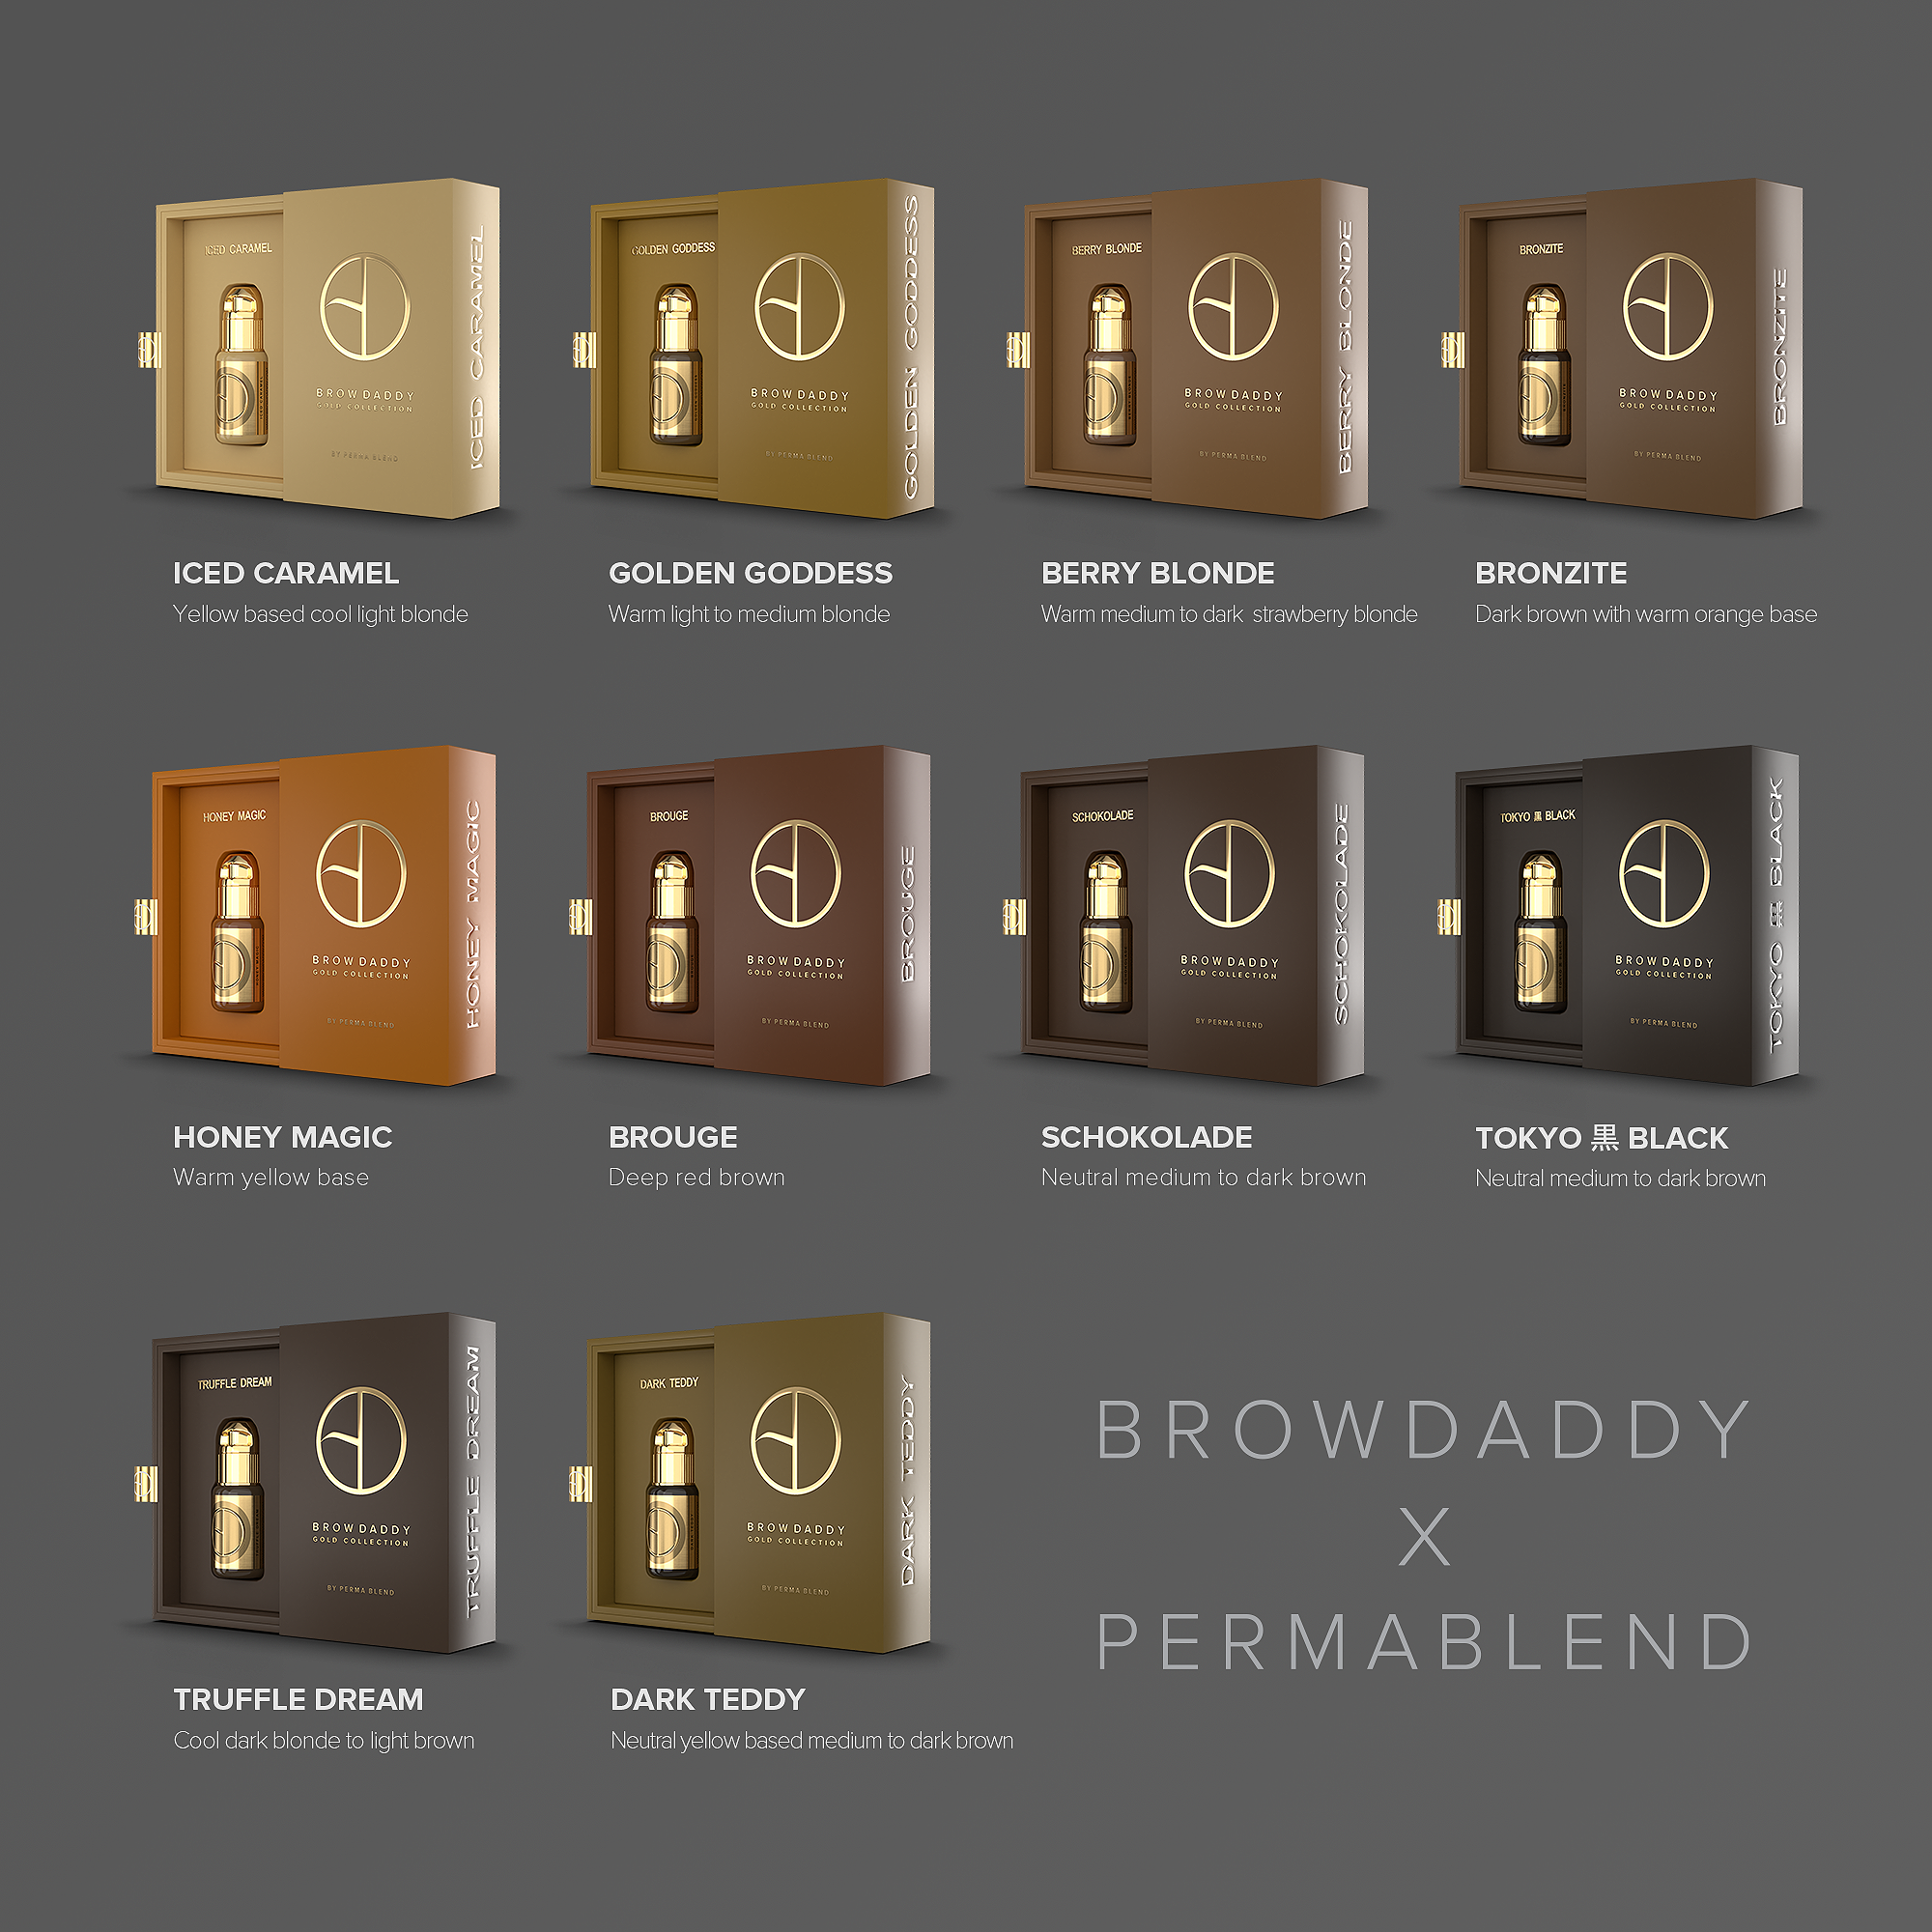 Brow Daddy - Gold Collection Single - Brouge